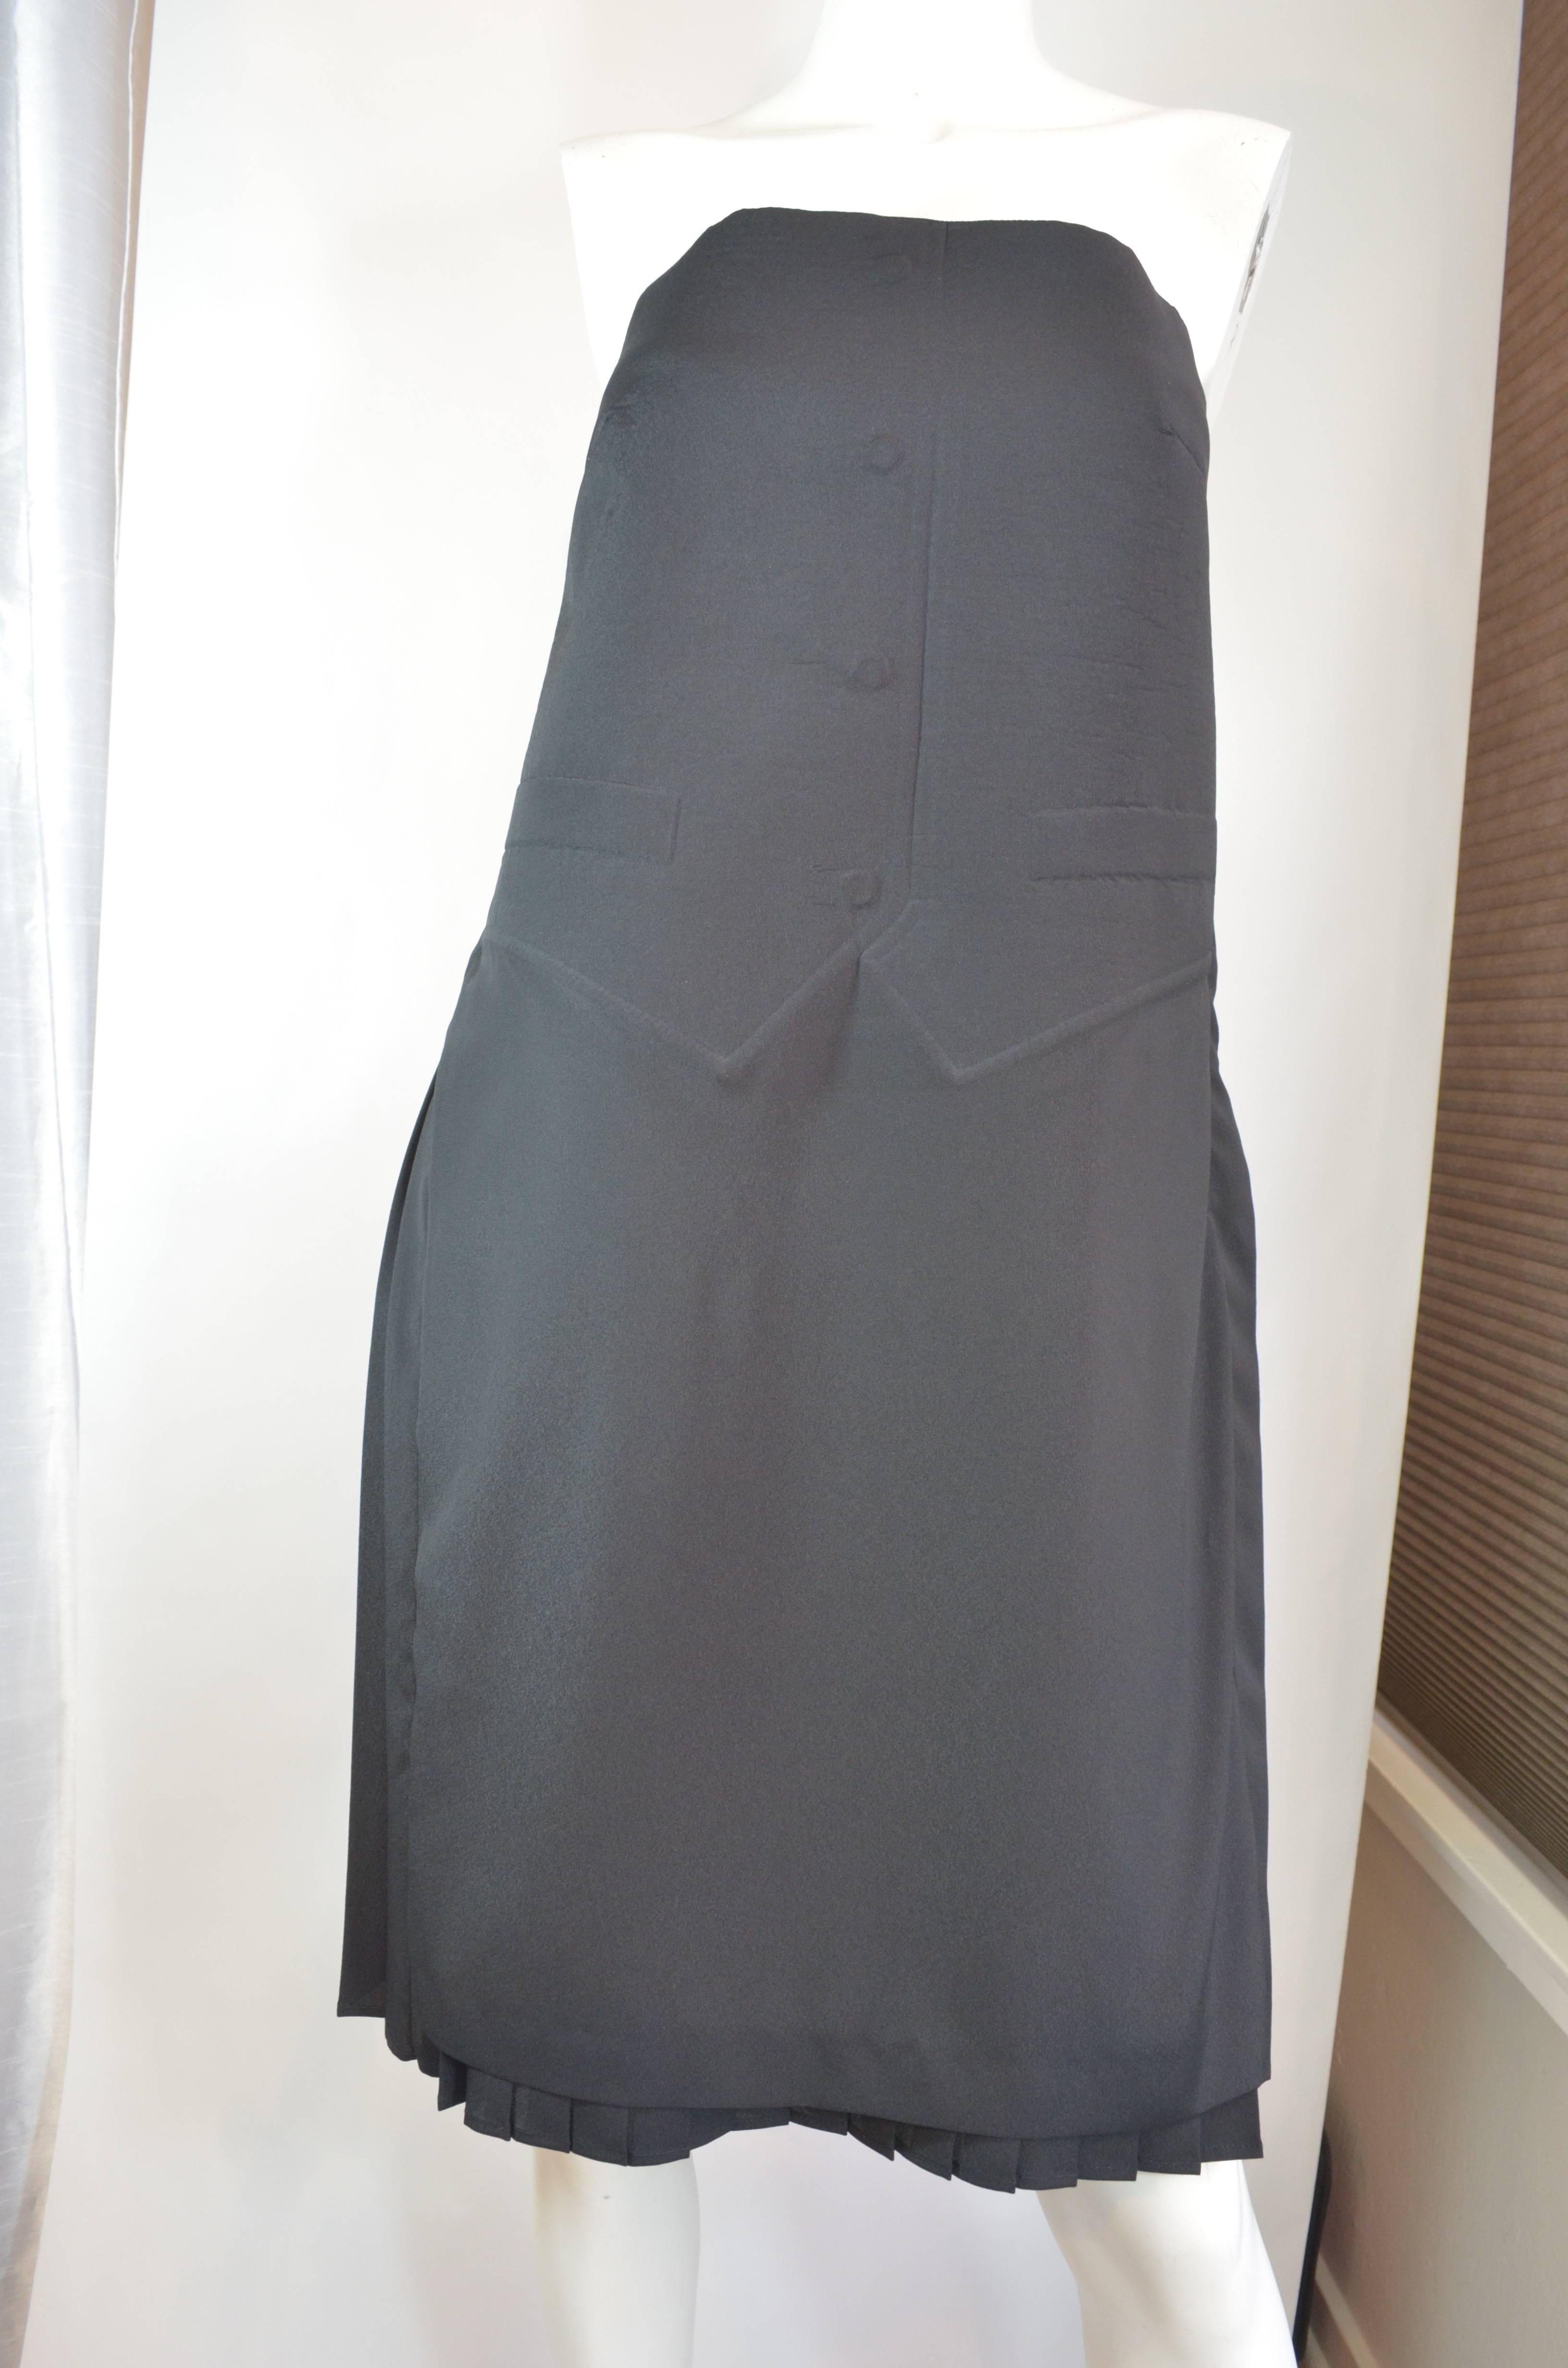 2014 Maison Martin Margiela strapless cocktail dress with embossed vest.  The bodice of the dress is embossed with a tuxedo style vest imprint and the front of the skirt is flat.  The left side of the dress has a zip.  The back of the skirt is